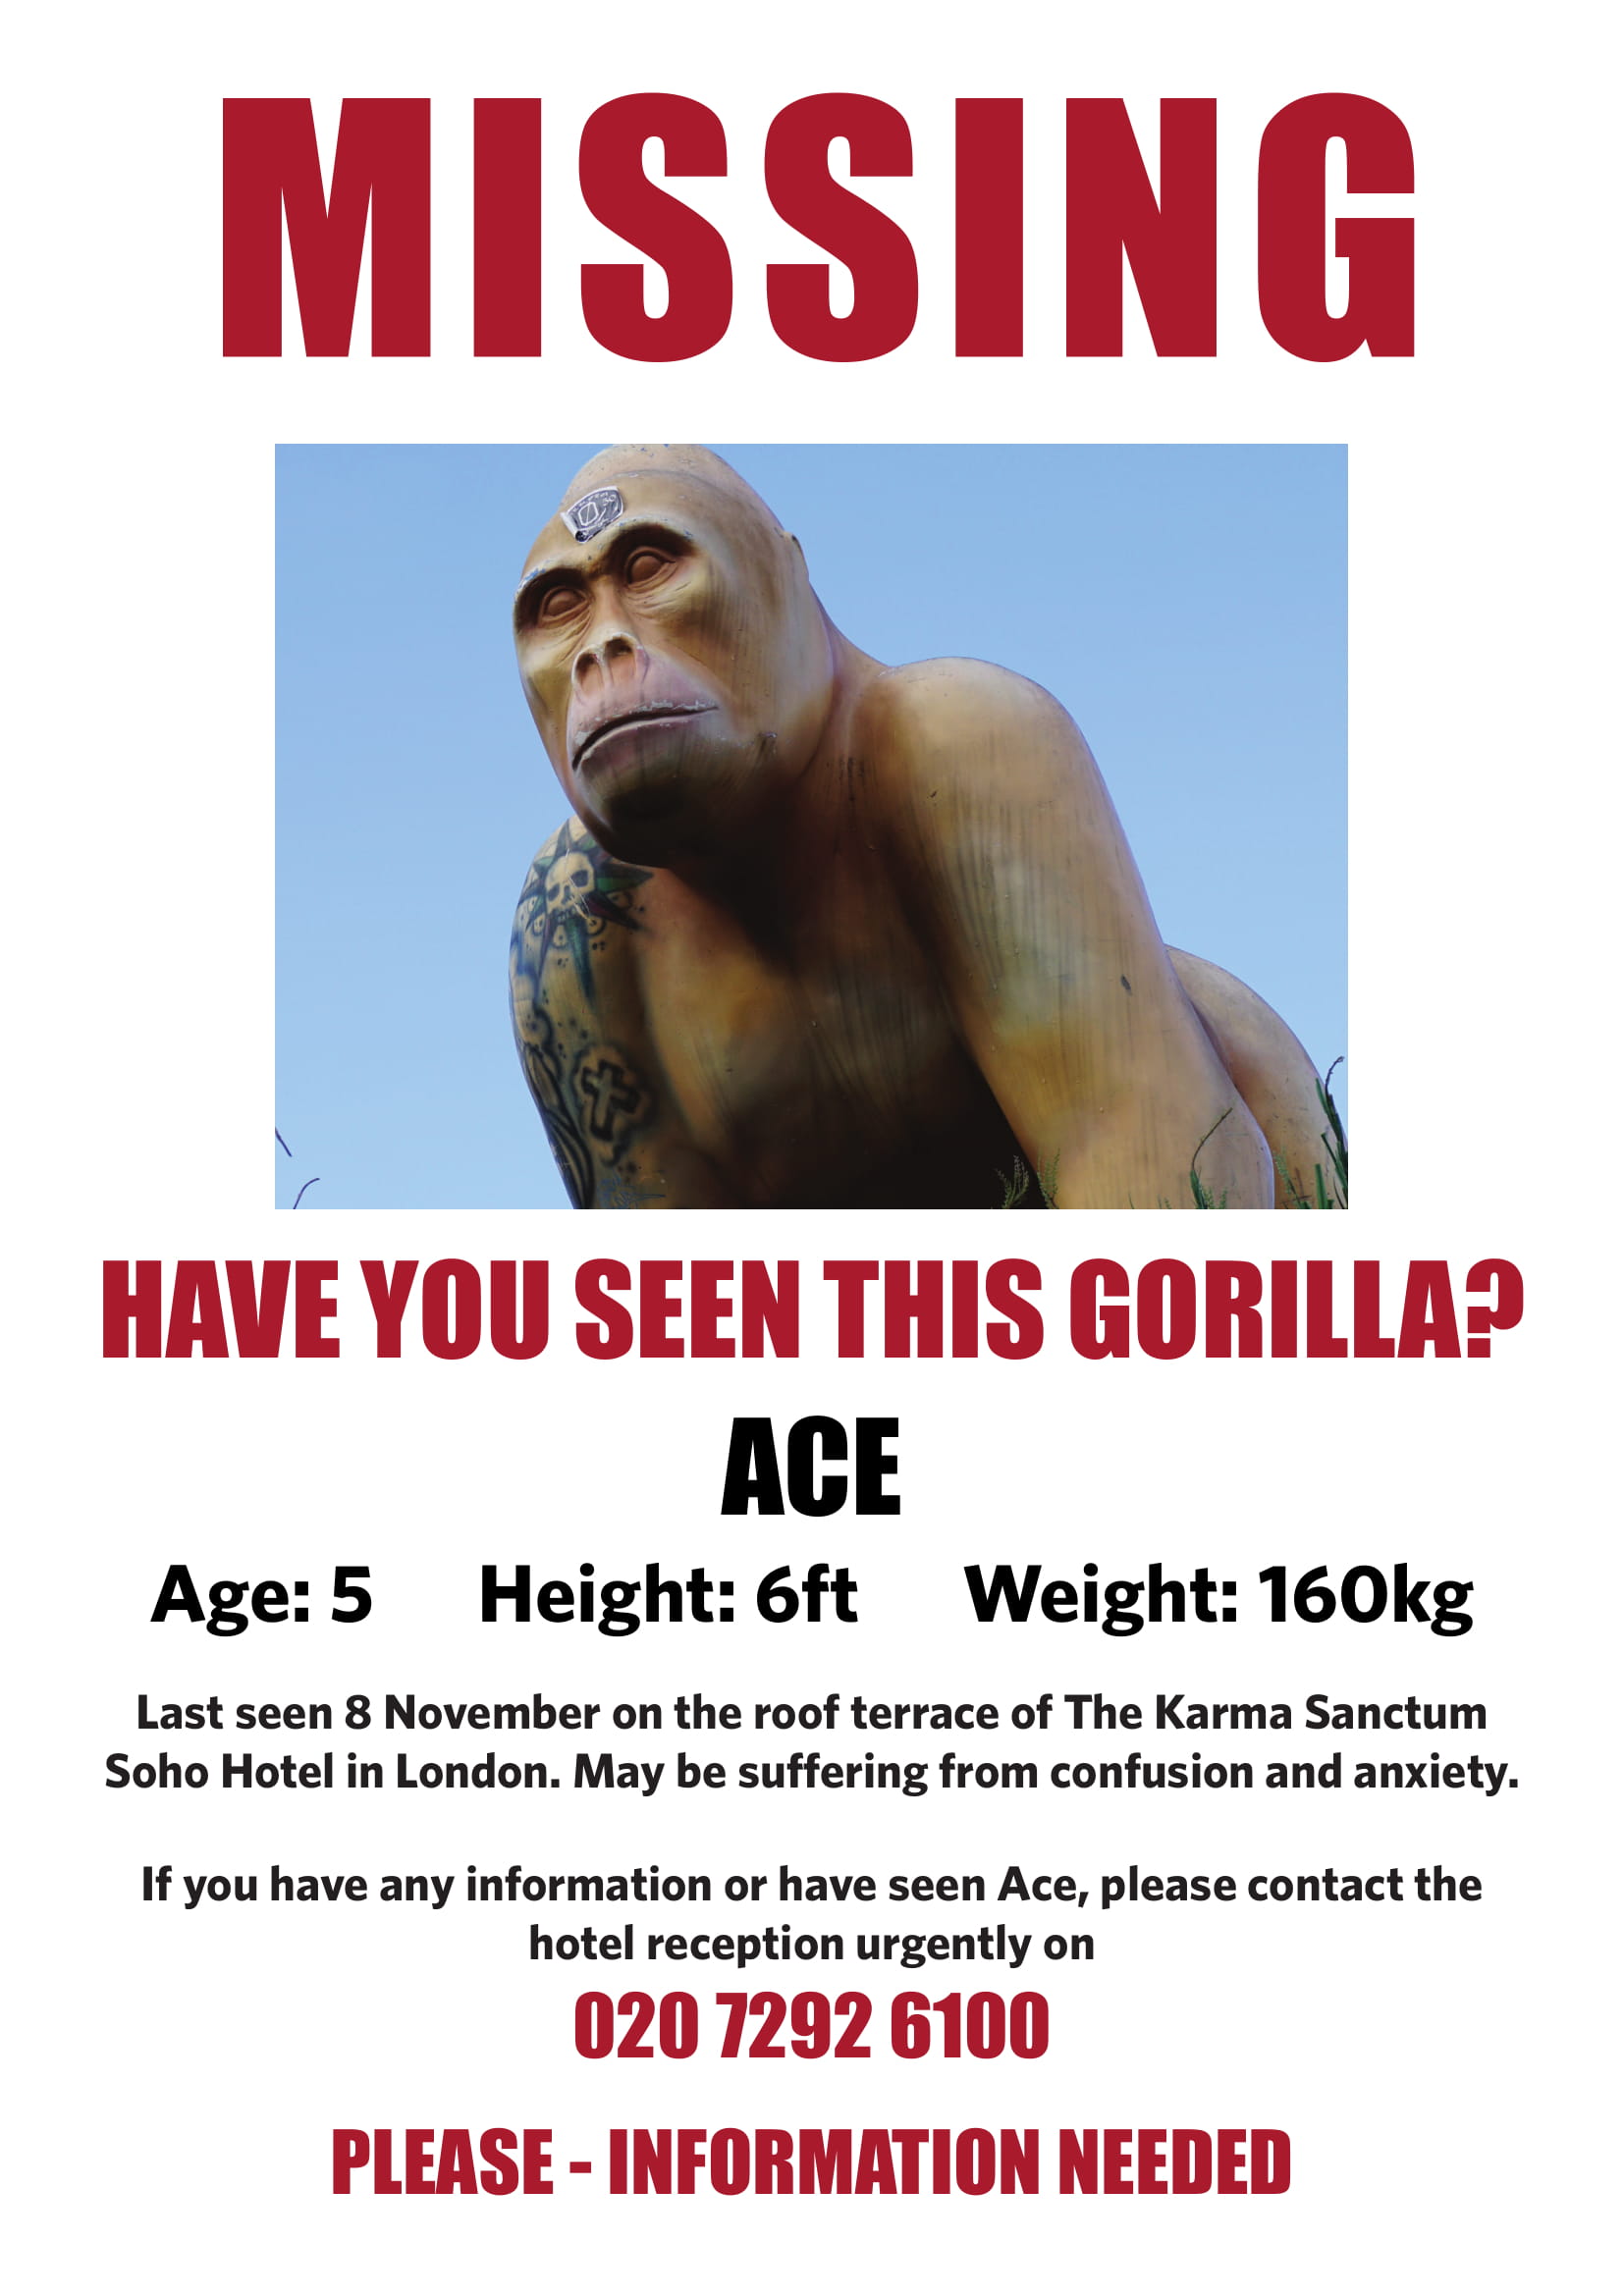 A missing posted for the gorilla statue